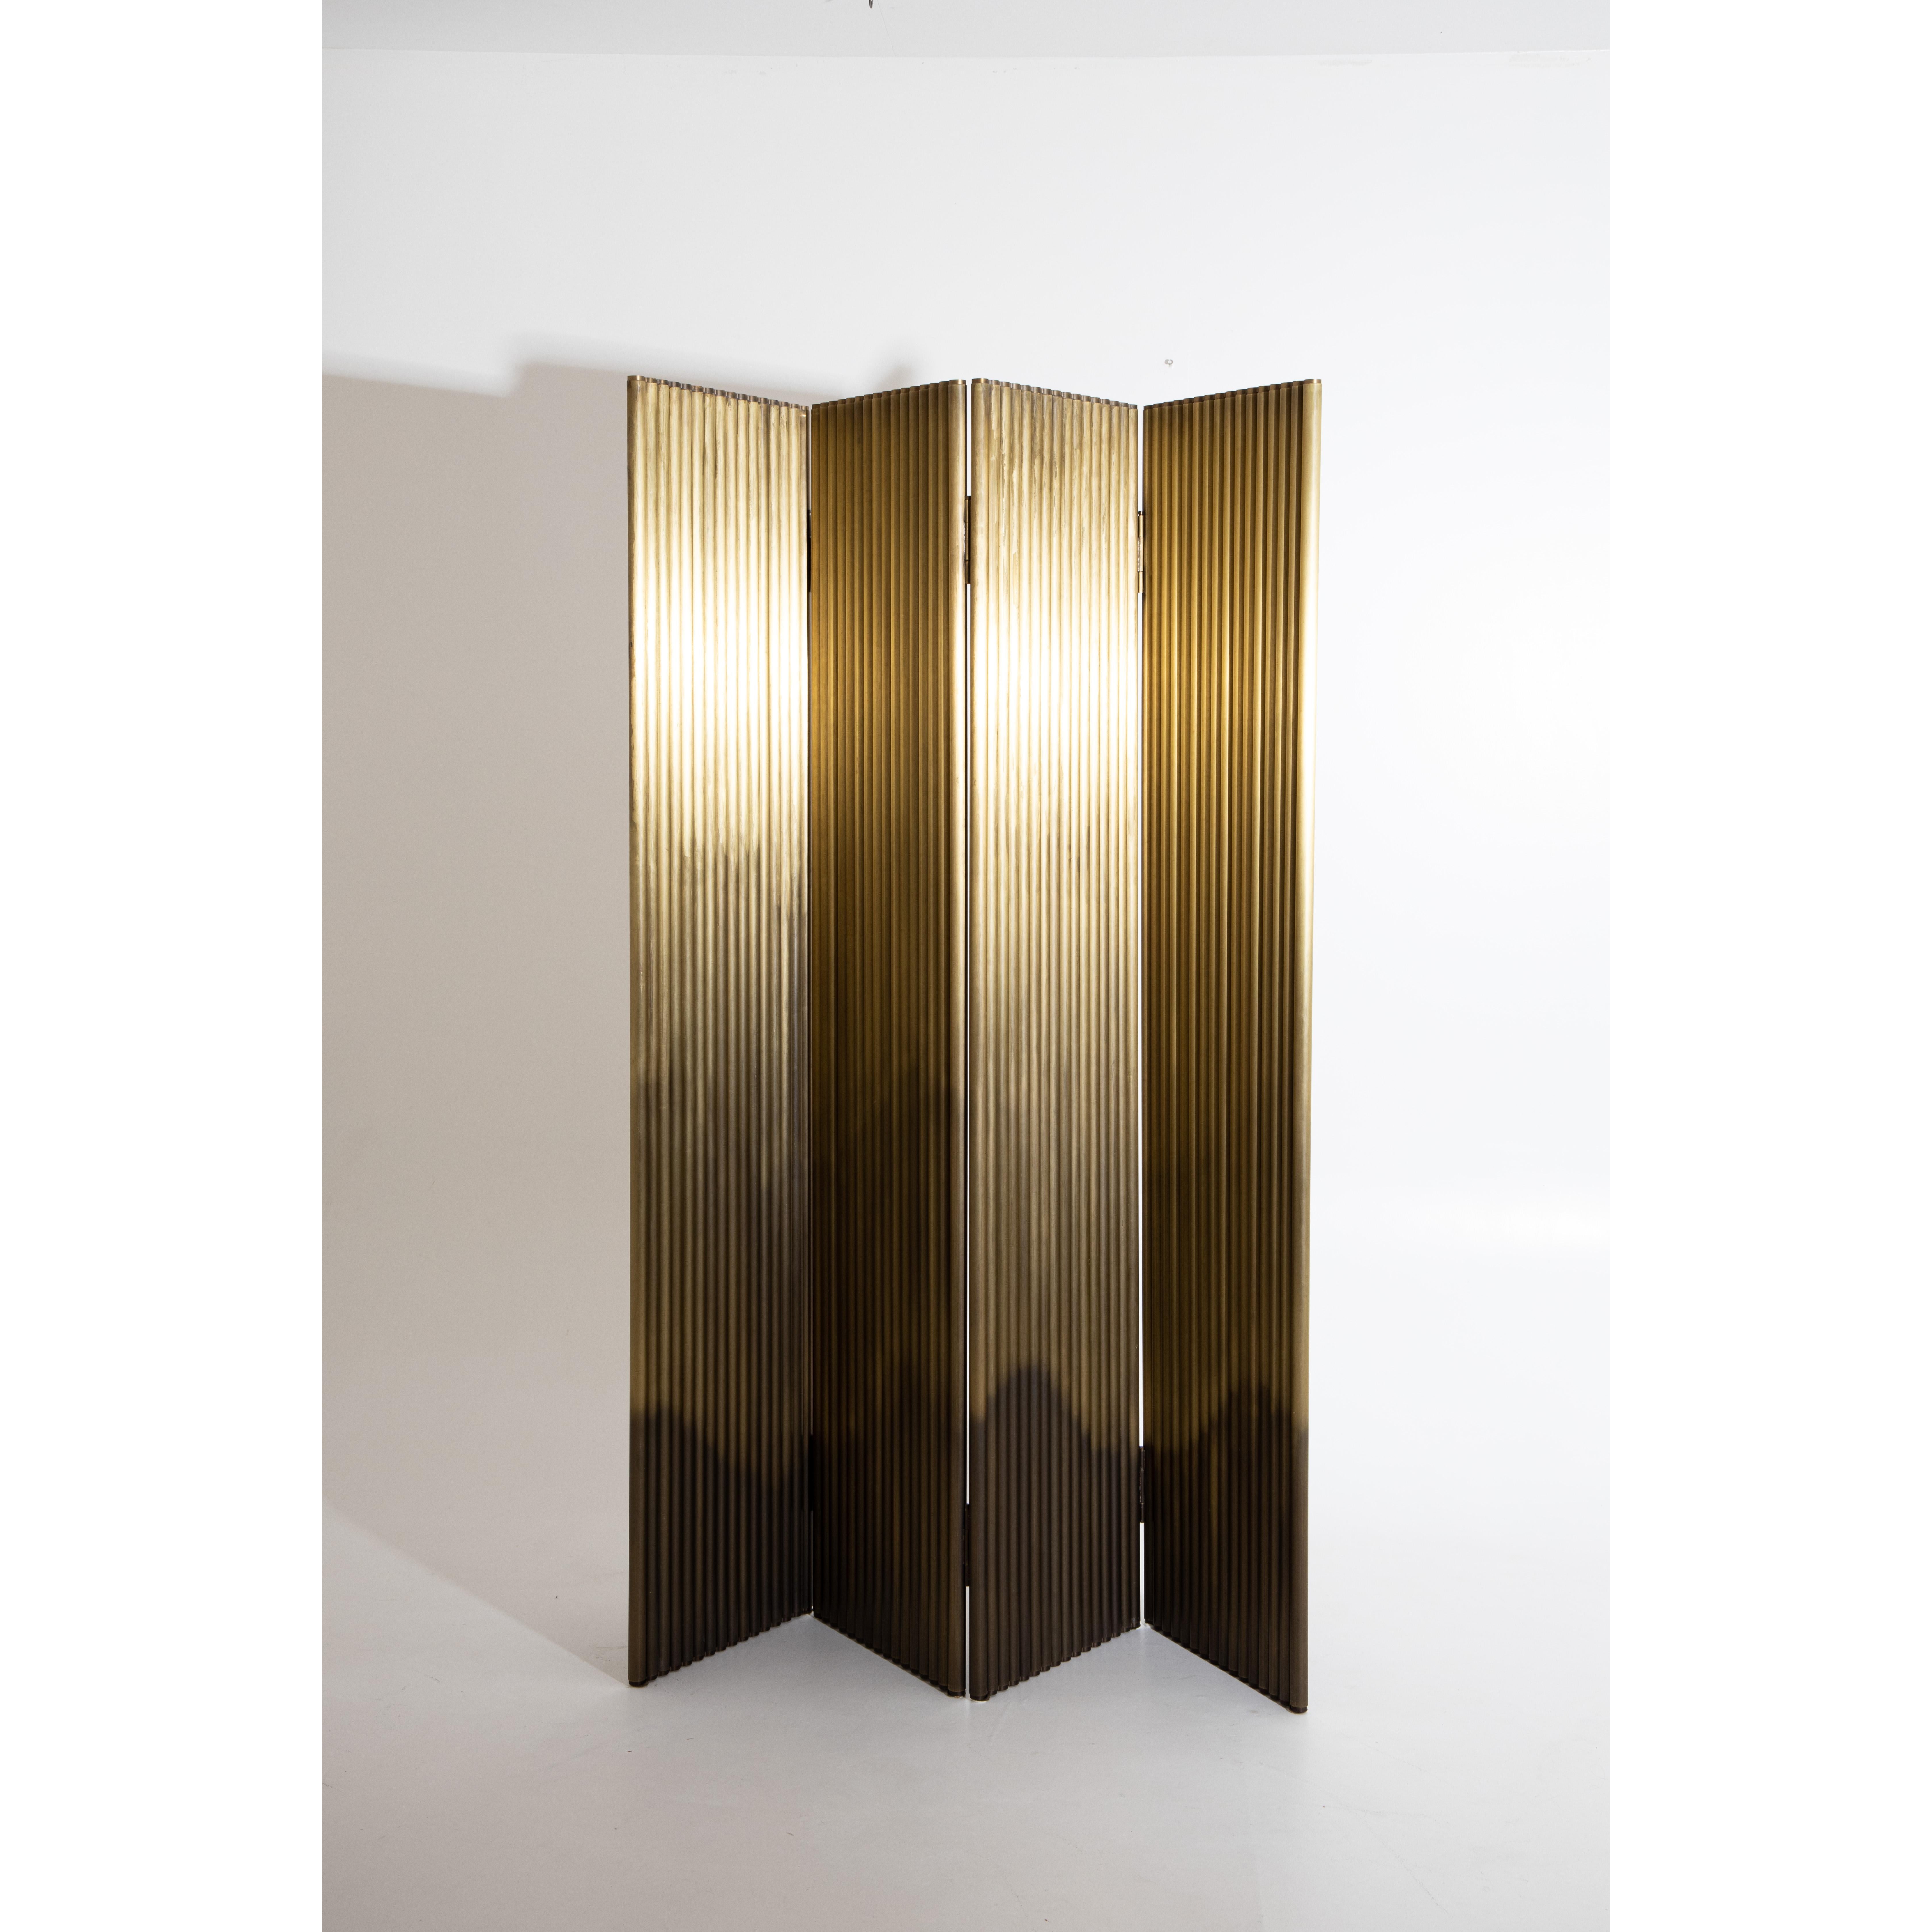 Three-part, solid screen made of brass rods and different shades. Very good, heavy quality.